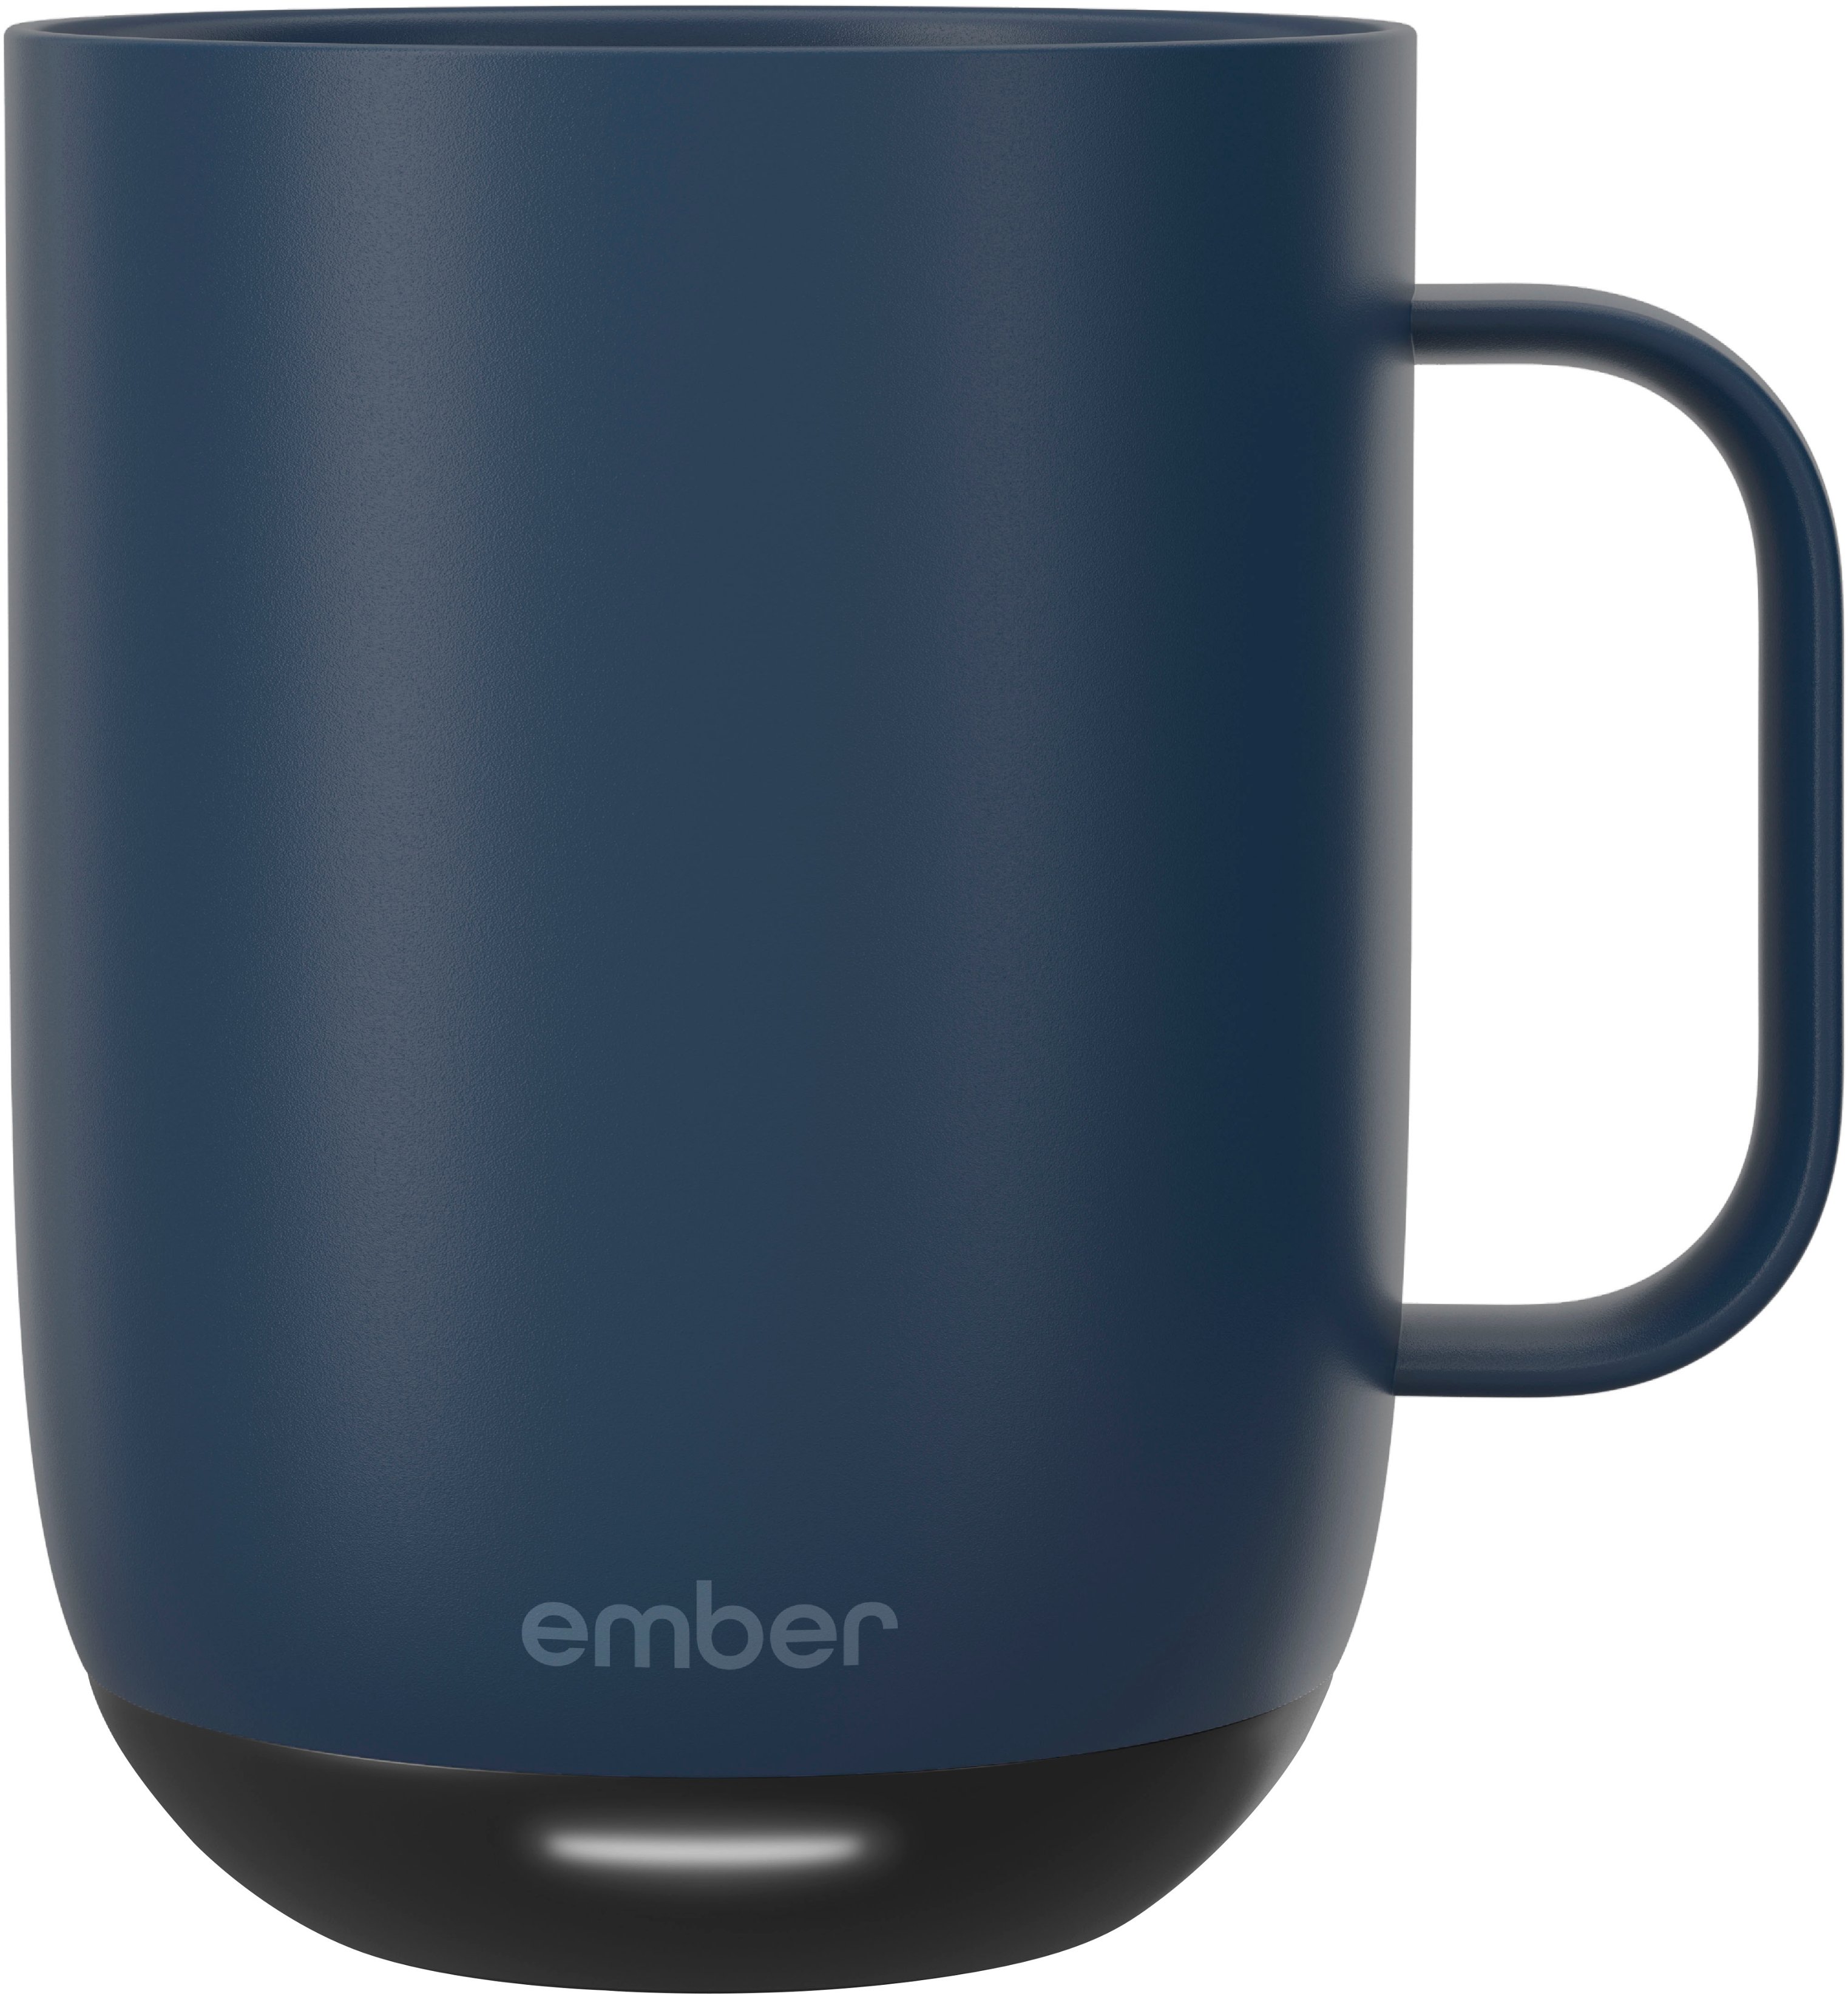 Ember®: The World's First Temperature Control Mug®